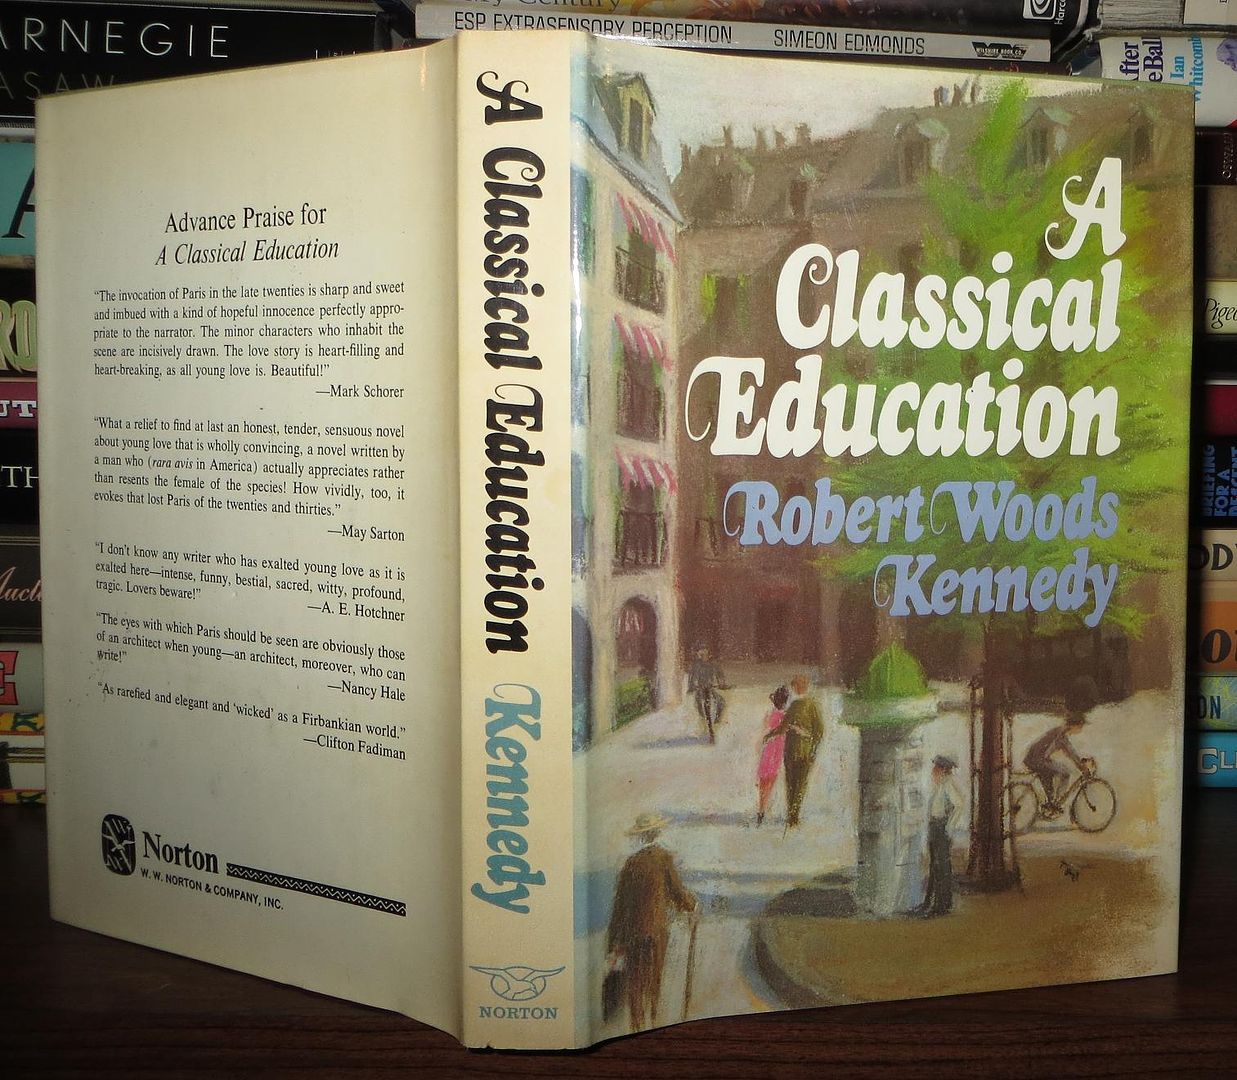 KENNEDY, ROBERT WOODS - A Classical Education